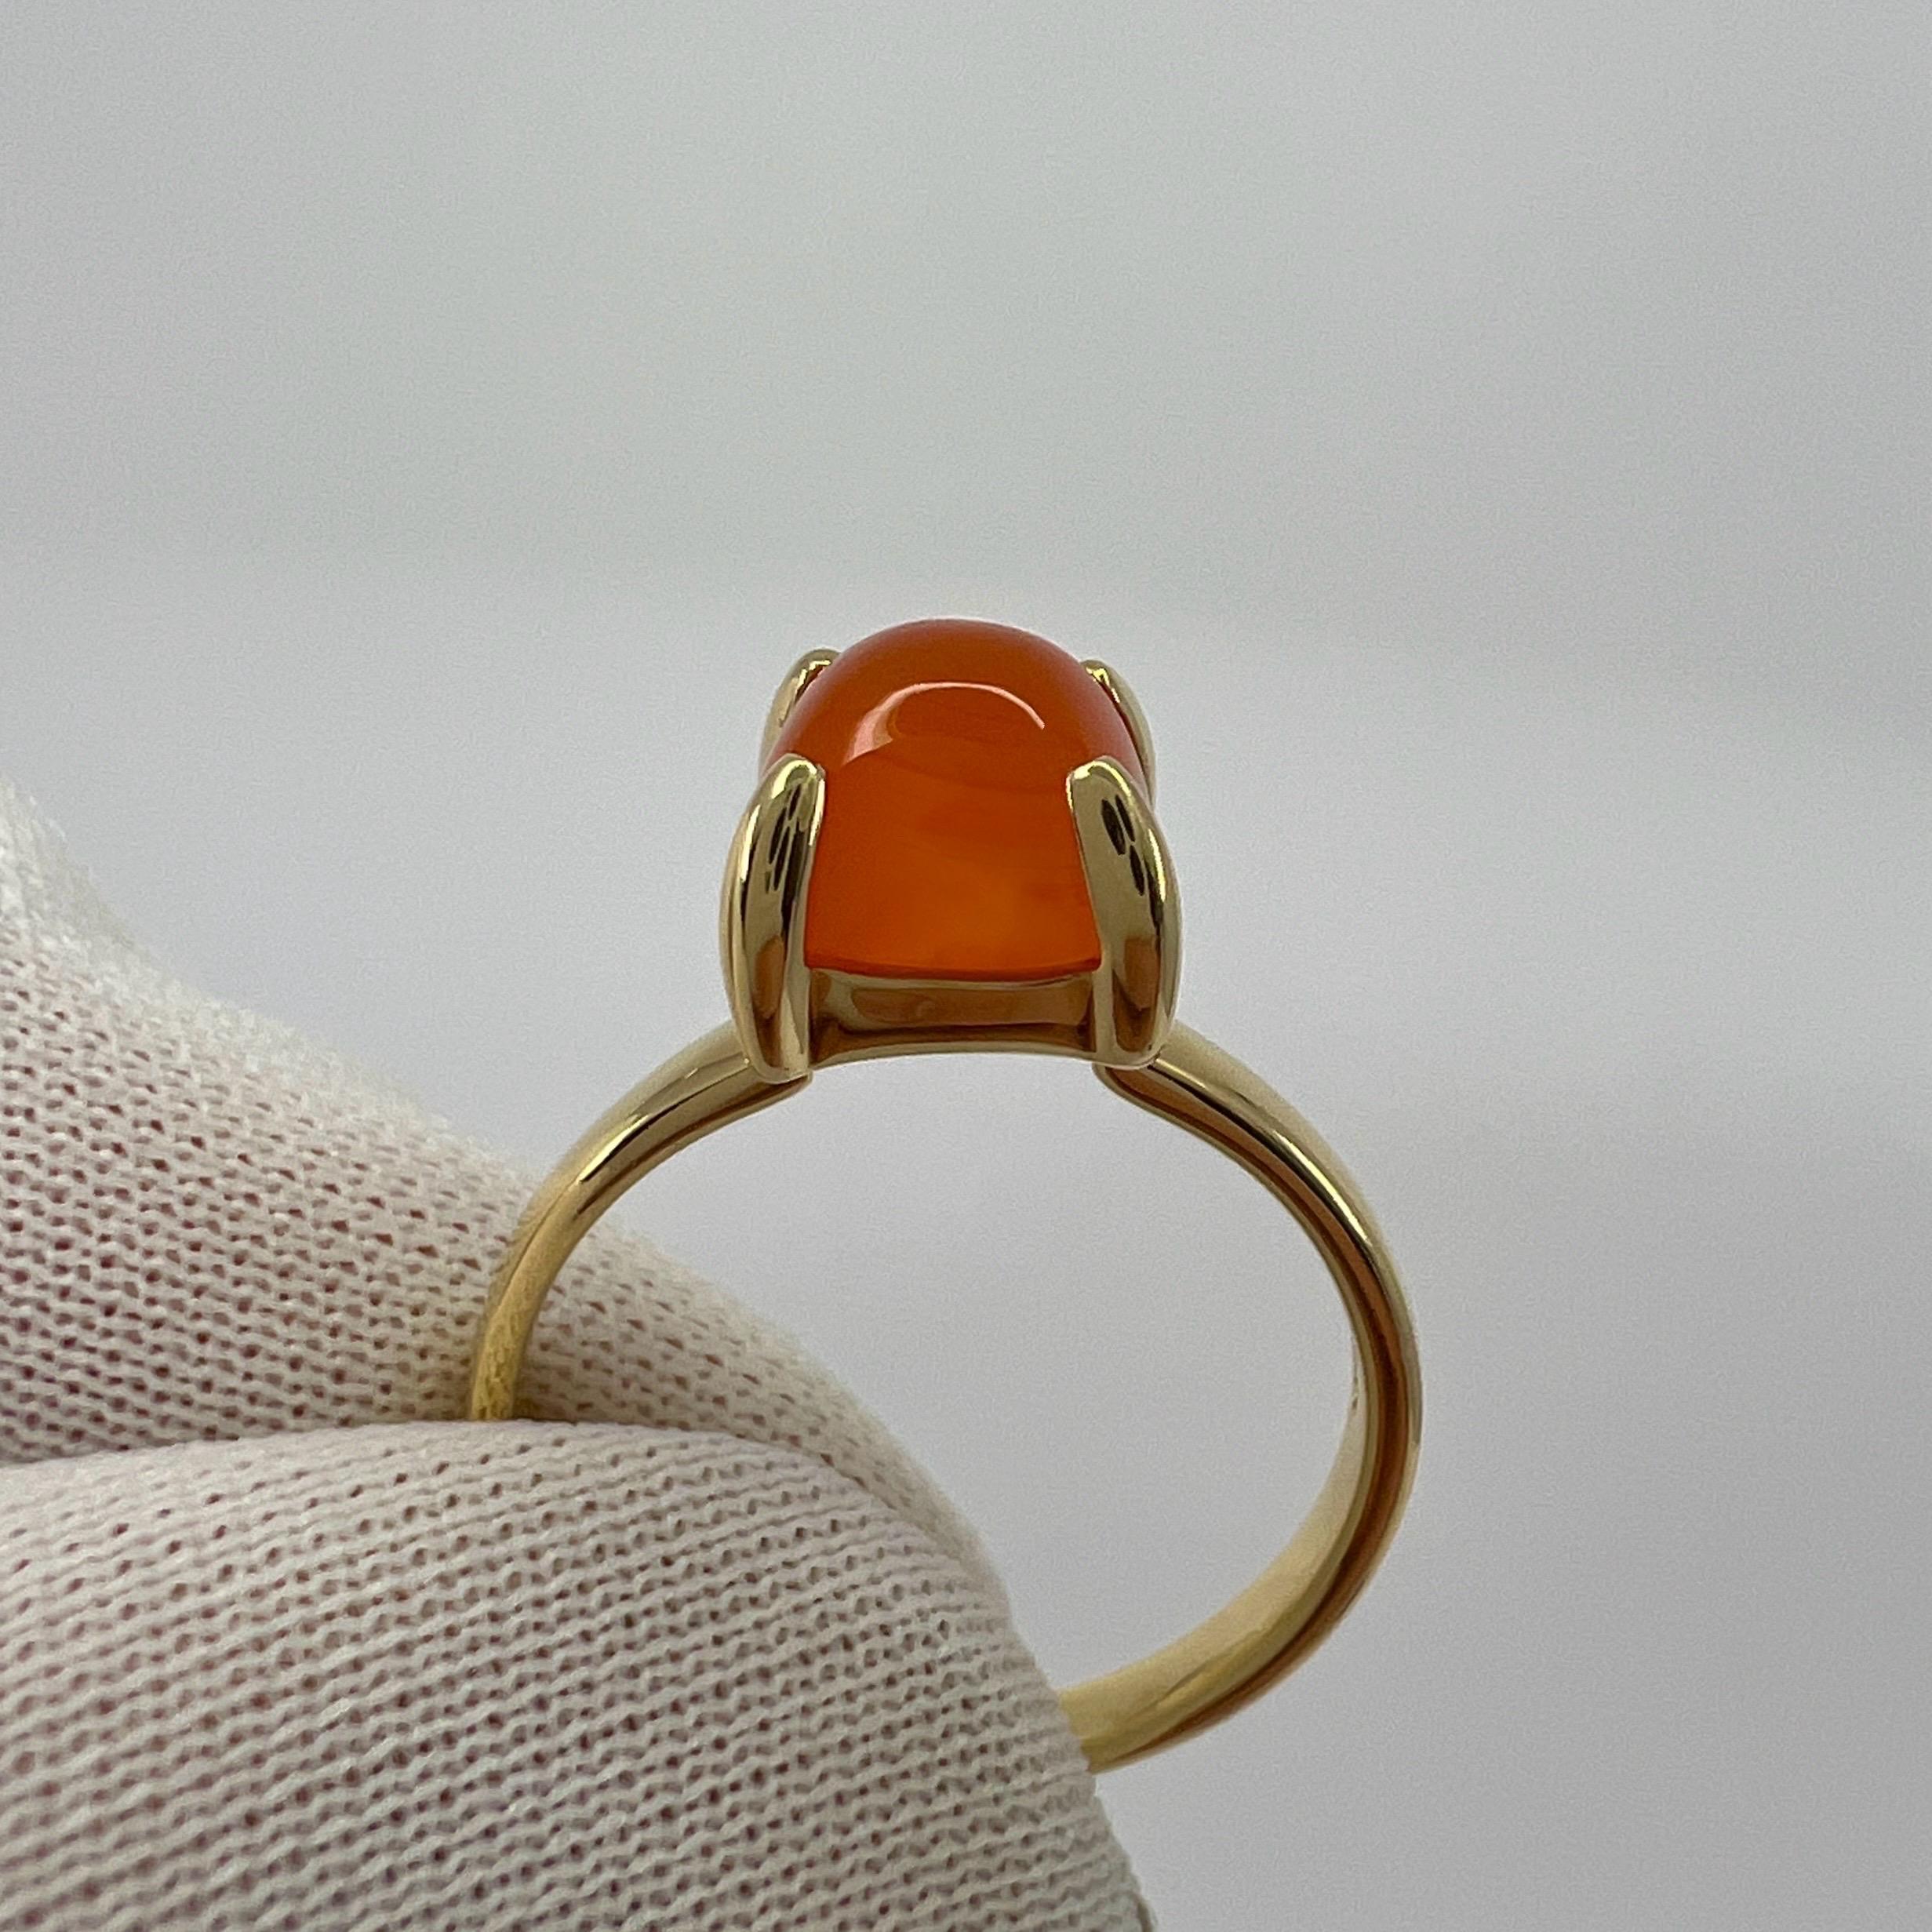 Tiffany & Co. Paloma Picasso Orange Chalcedony Sugar Stack Loaf 18k Gold Ring For Sale 2